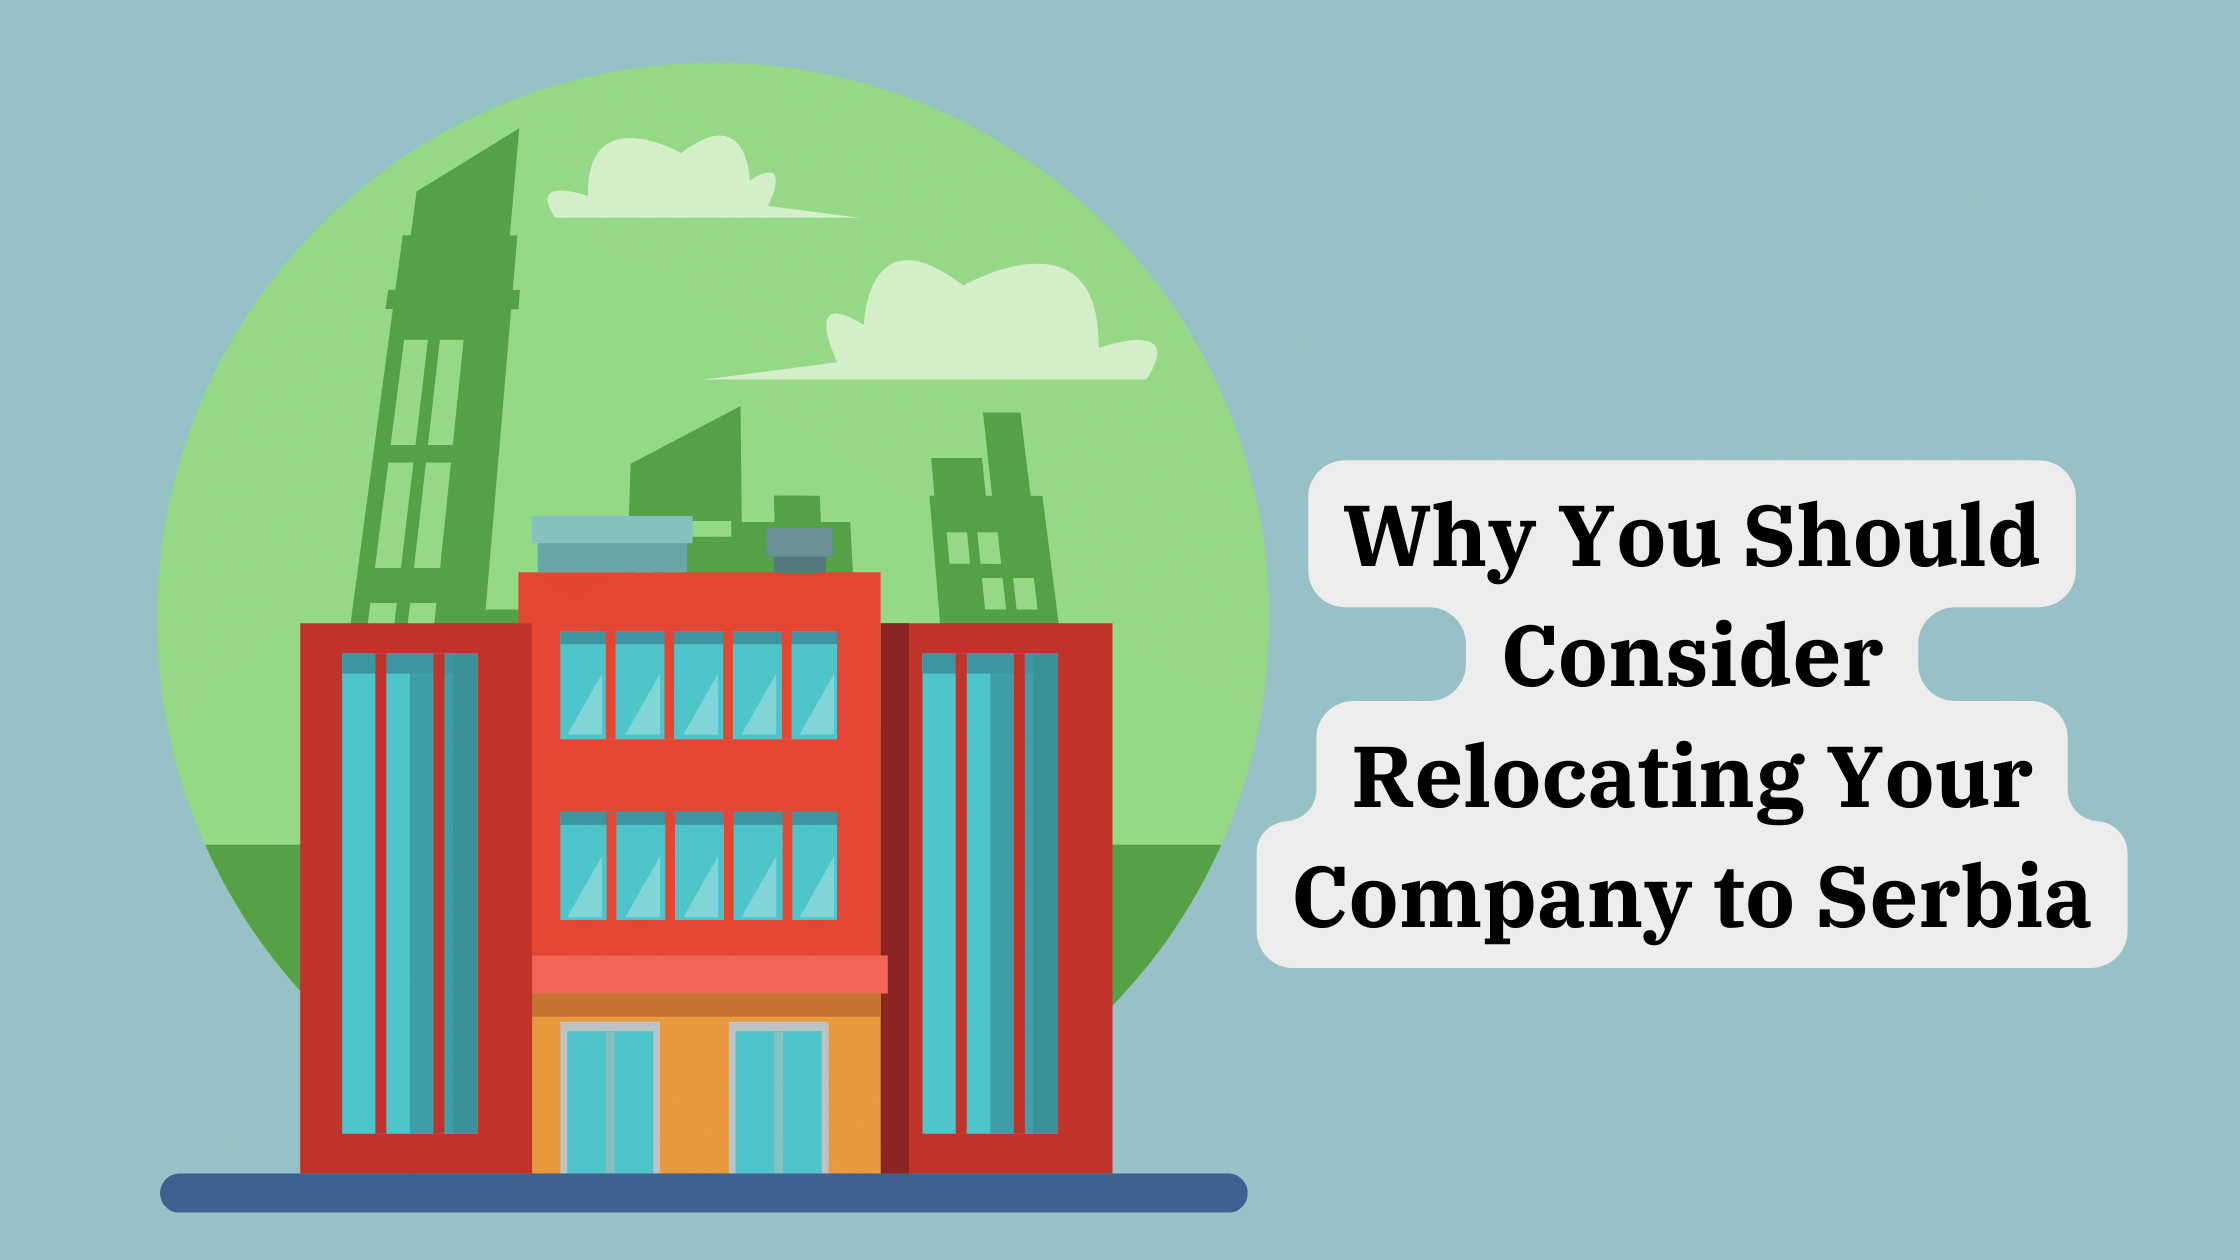 Relocating Your Company to Serbia